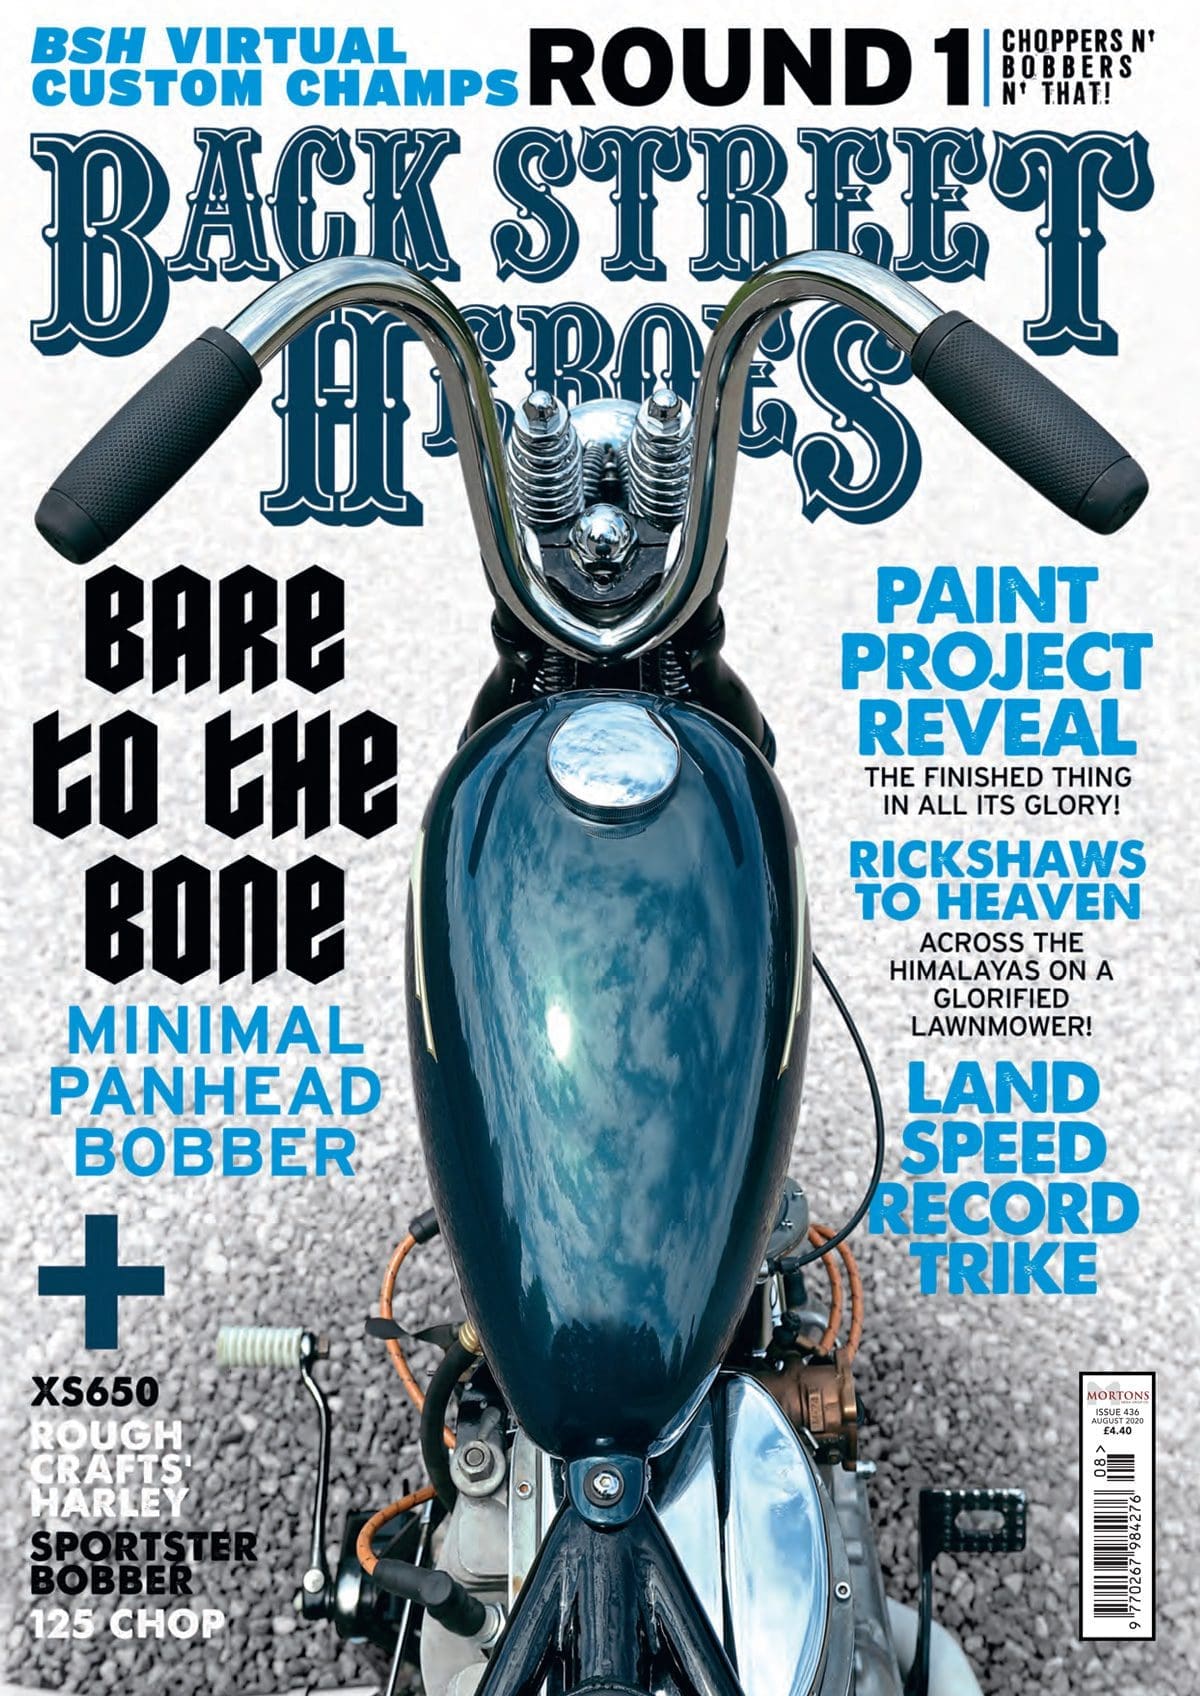 What’s inside the August edition of Back Street Heroes?